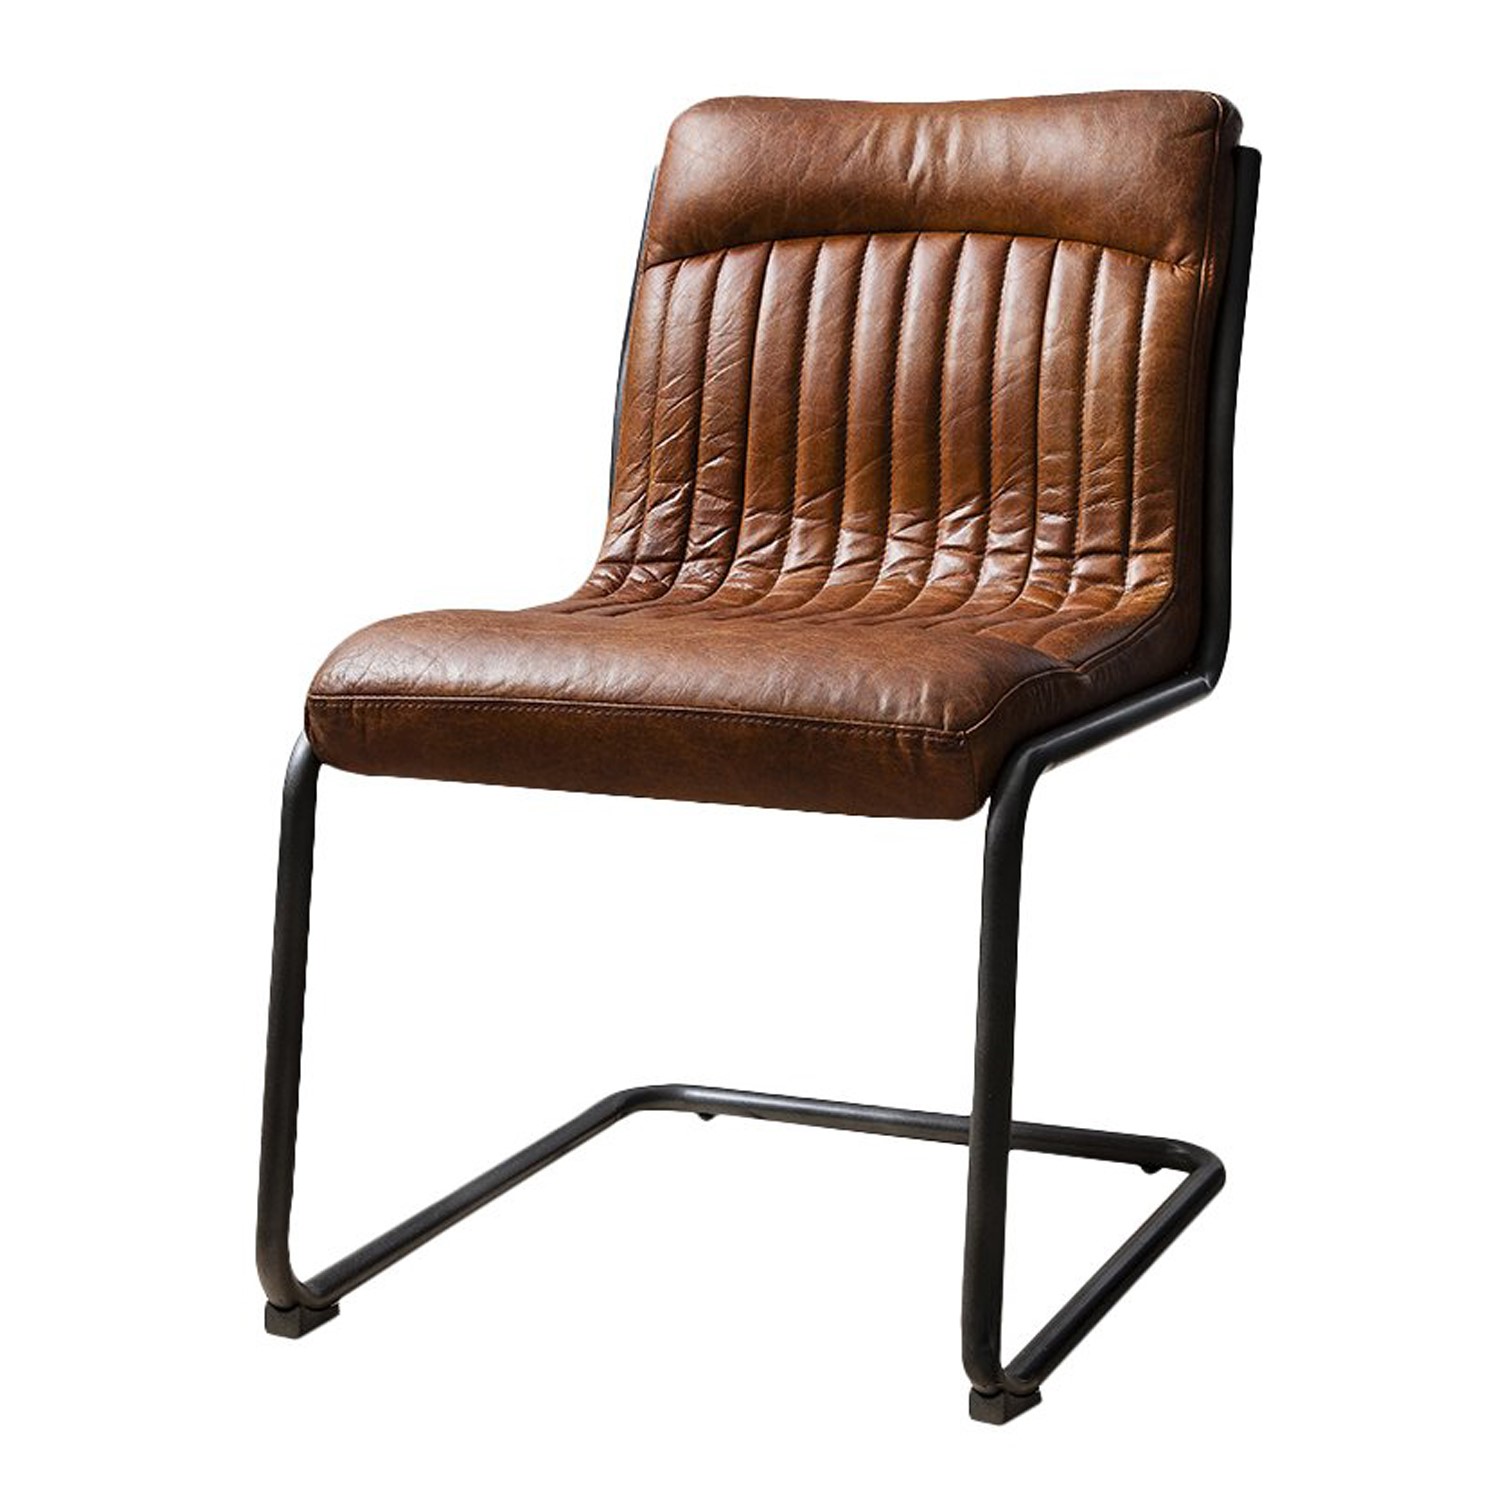 Read more about Real leather upholstered dining chair in antique tan caspian house